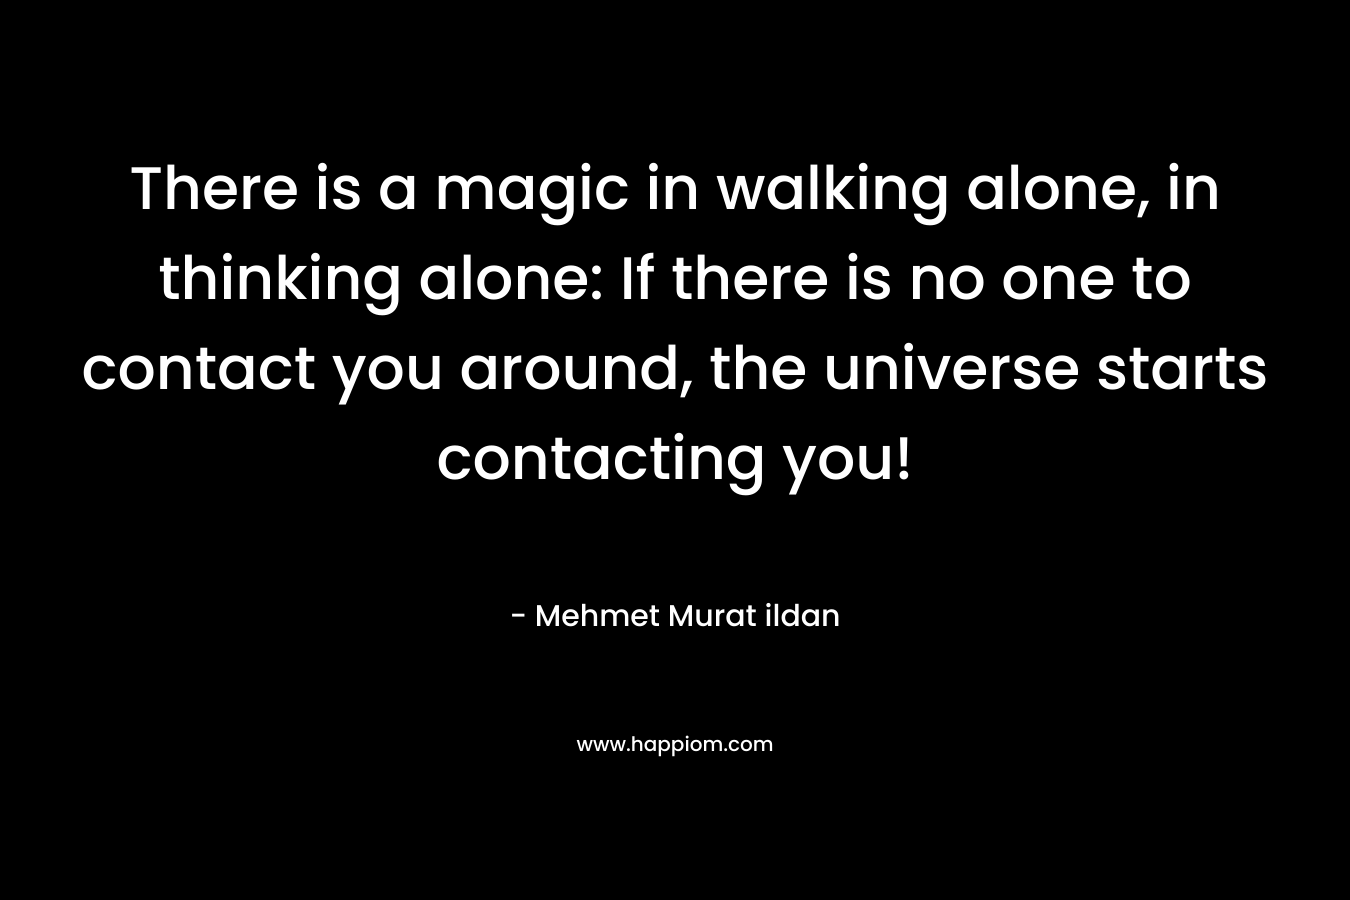 There is a magic in walking alone, in thinking alone: If there is no one to contact you around, the universe starts contacting you! – Mehmet Murat ildan